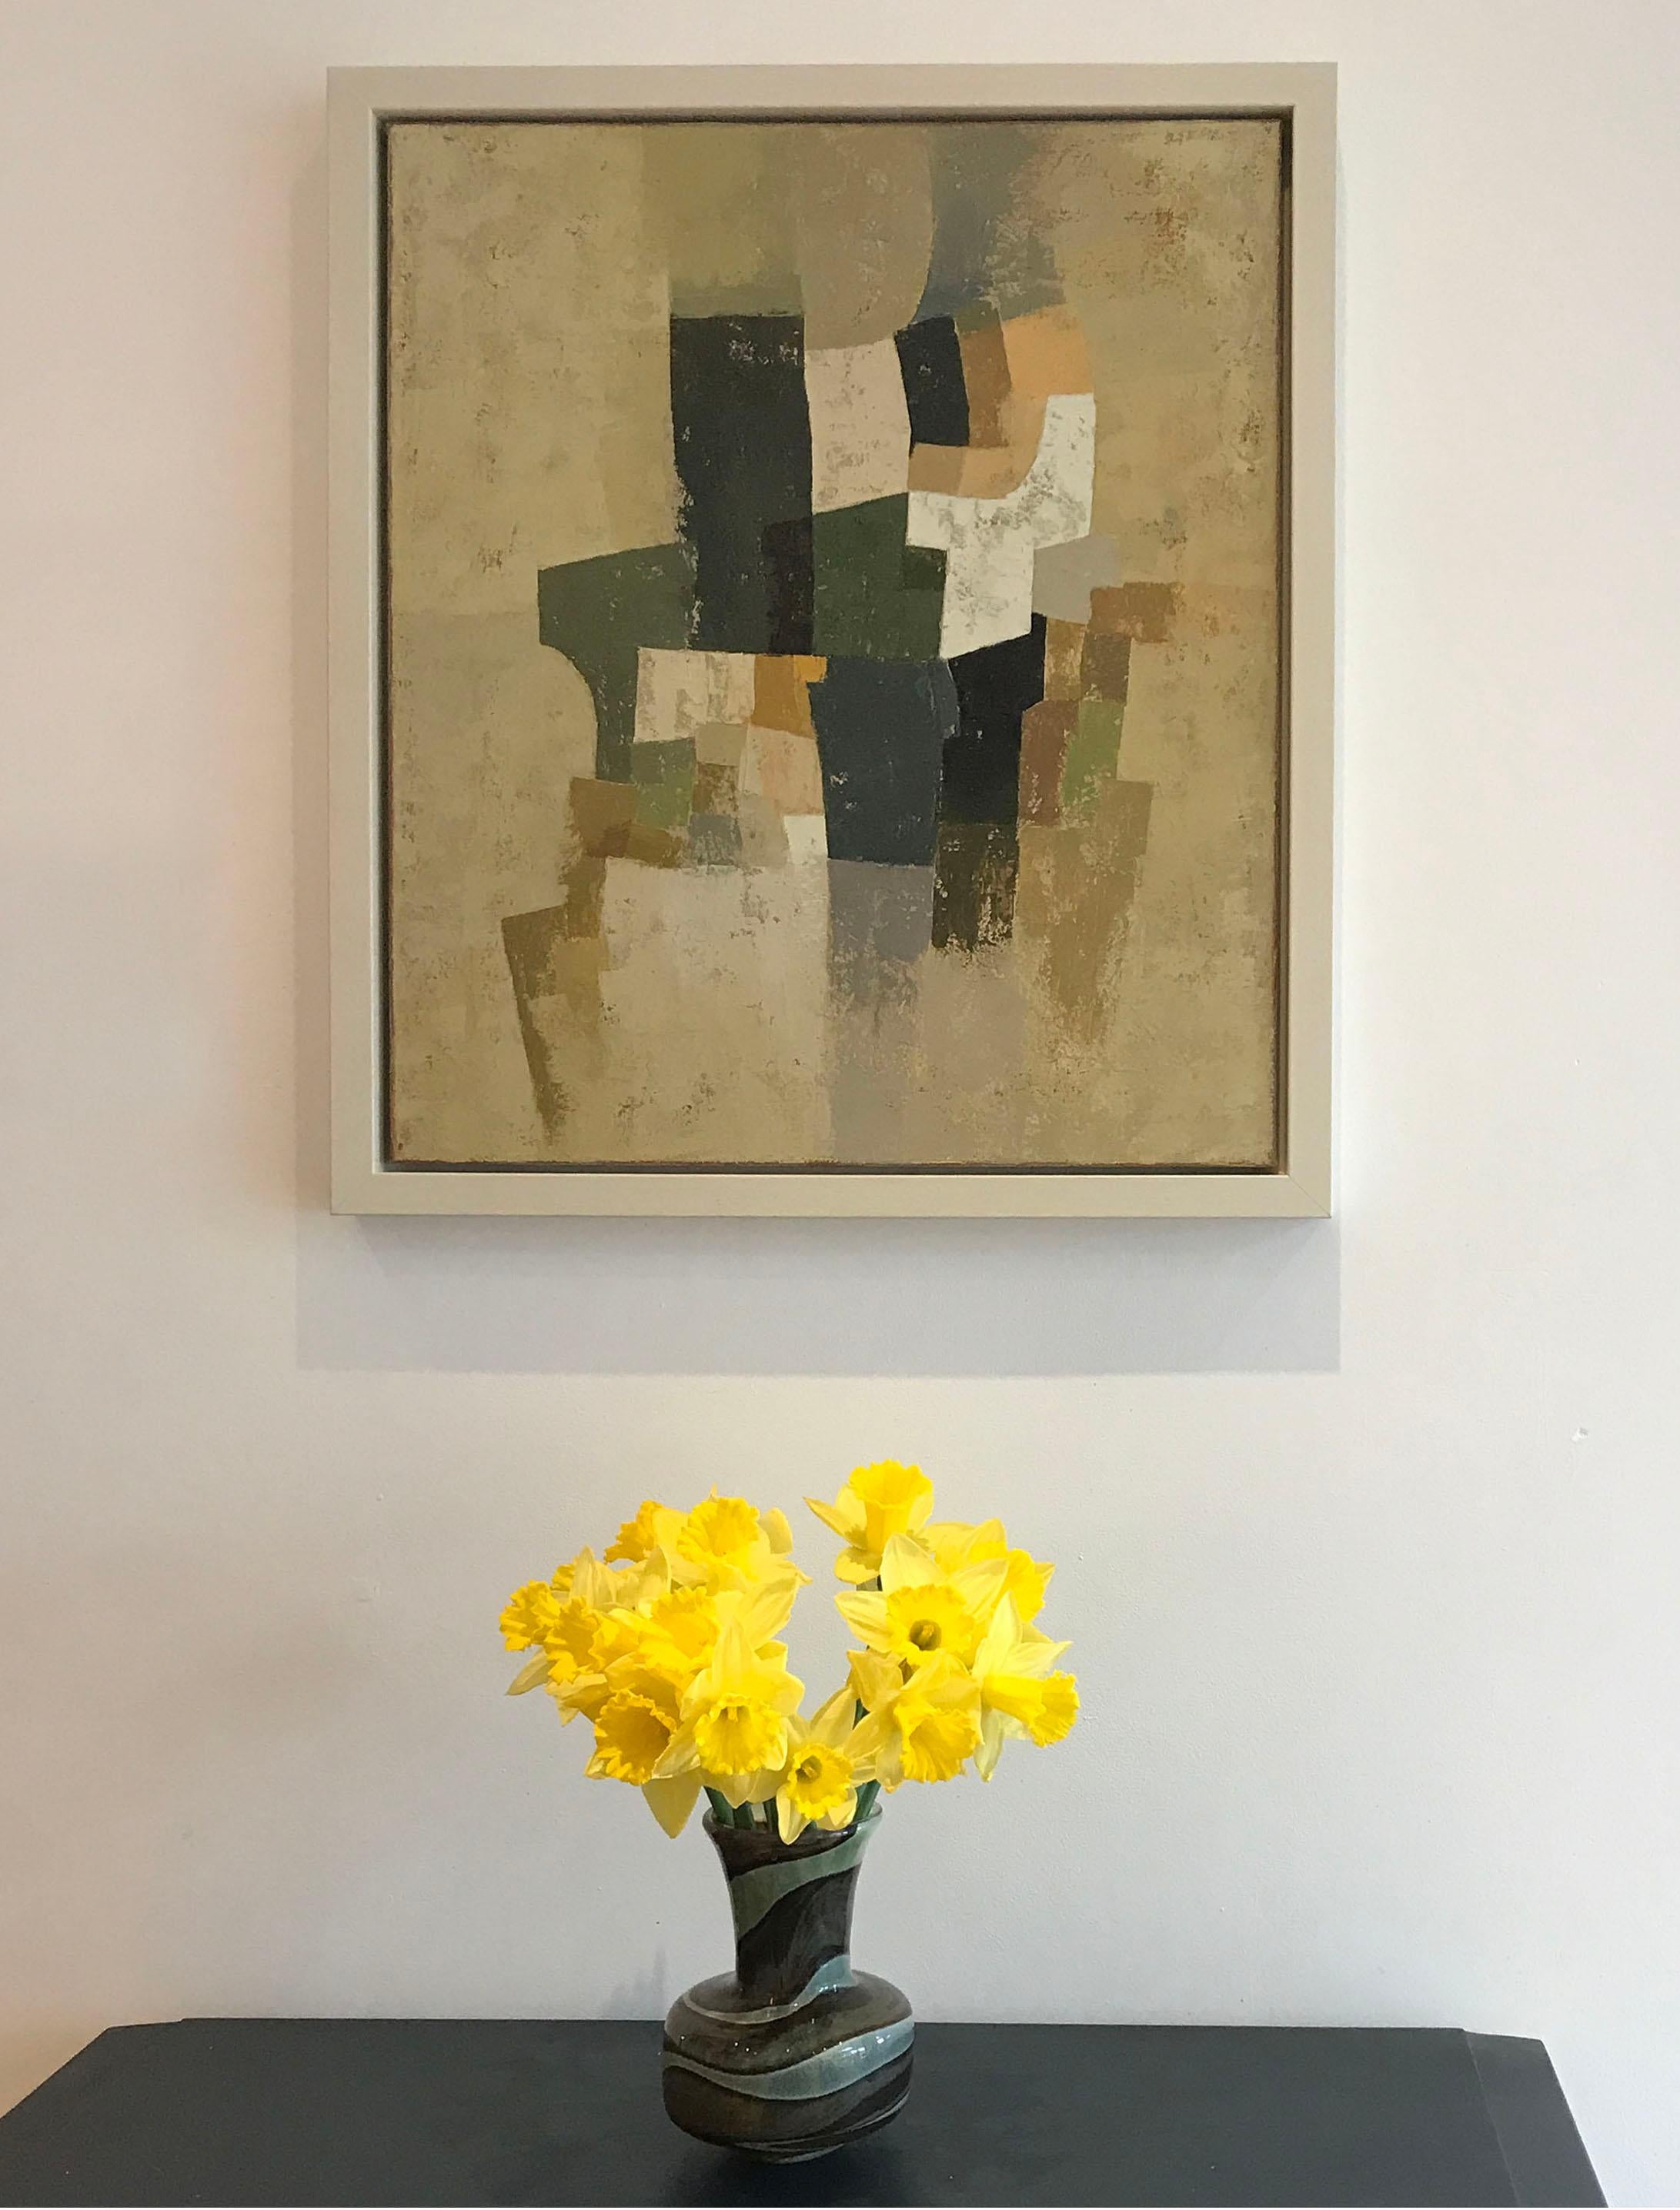 ‘Lamorna’ has been painted on stretched canvas and mounted into a hand-painted tray frame. These paintings are rooted in the tradition of British and European post-war Modernism, particularly abstract painting. Drawing inspiration from the